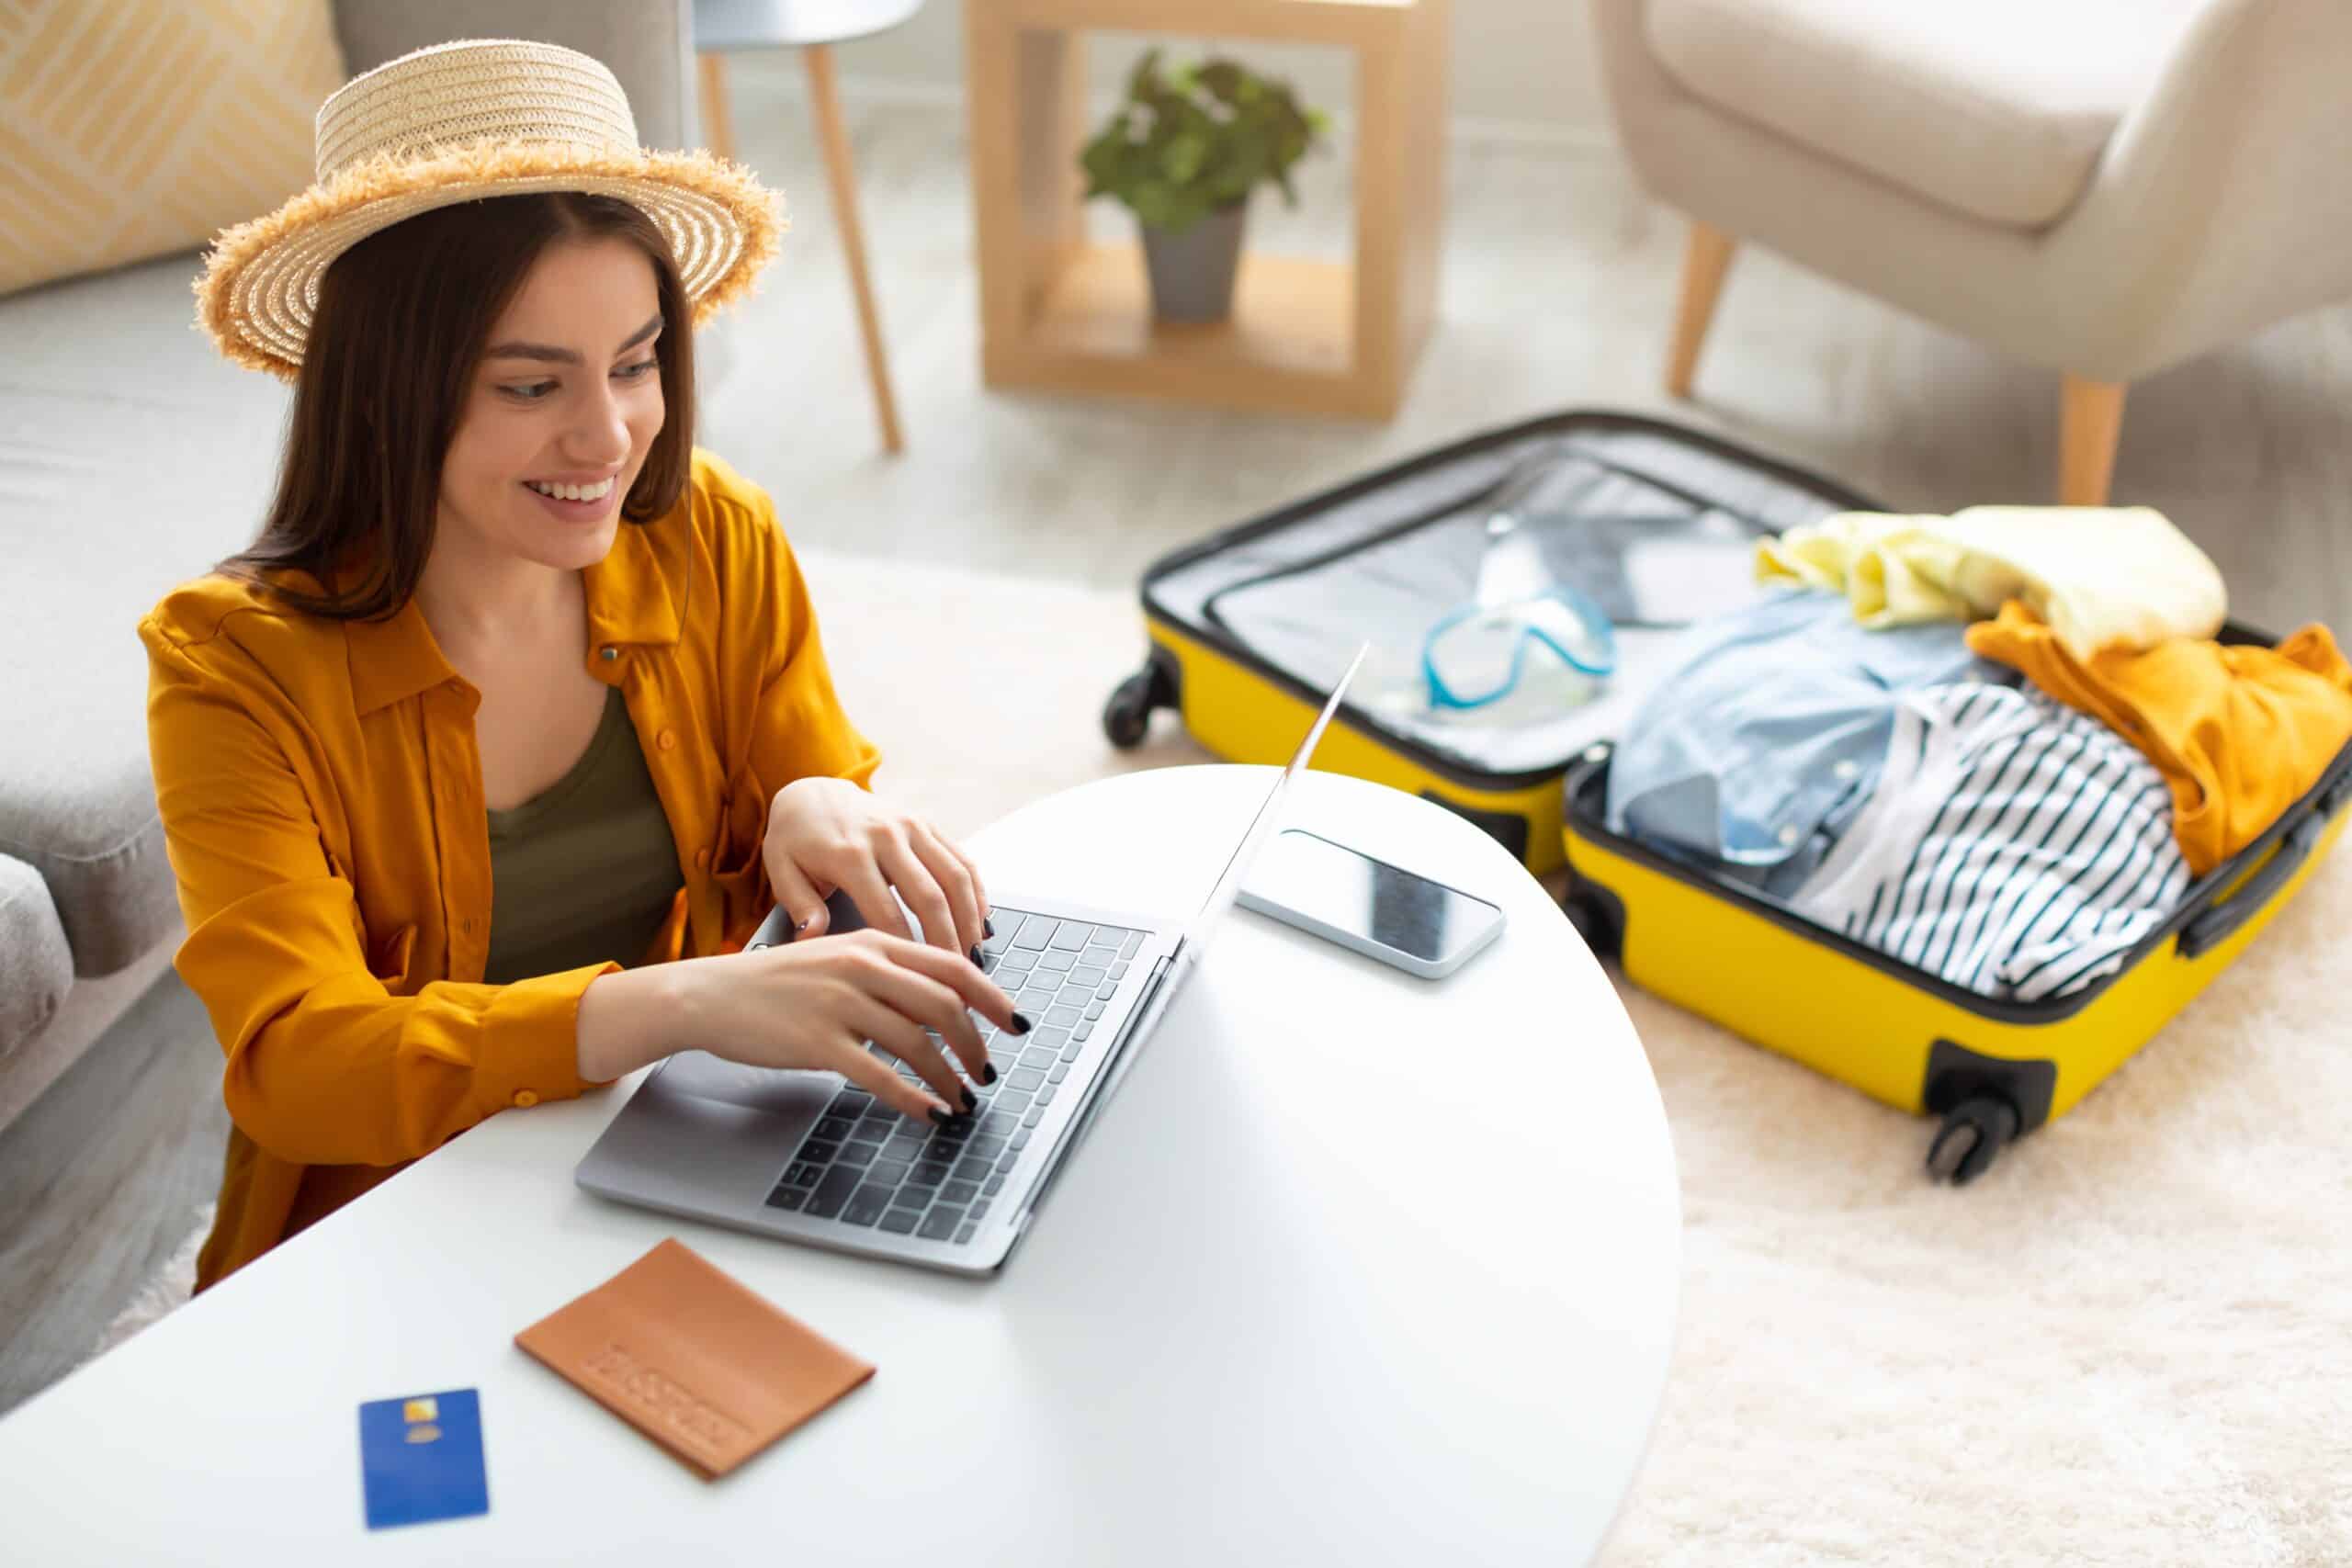 <p>Flexibility can lead to significant savings. Be open to last-minute deals and flexible with your travel dates and destinations. Sometimes, a change in plans can lead to unexpected adventures and even better deals.</p>